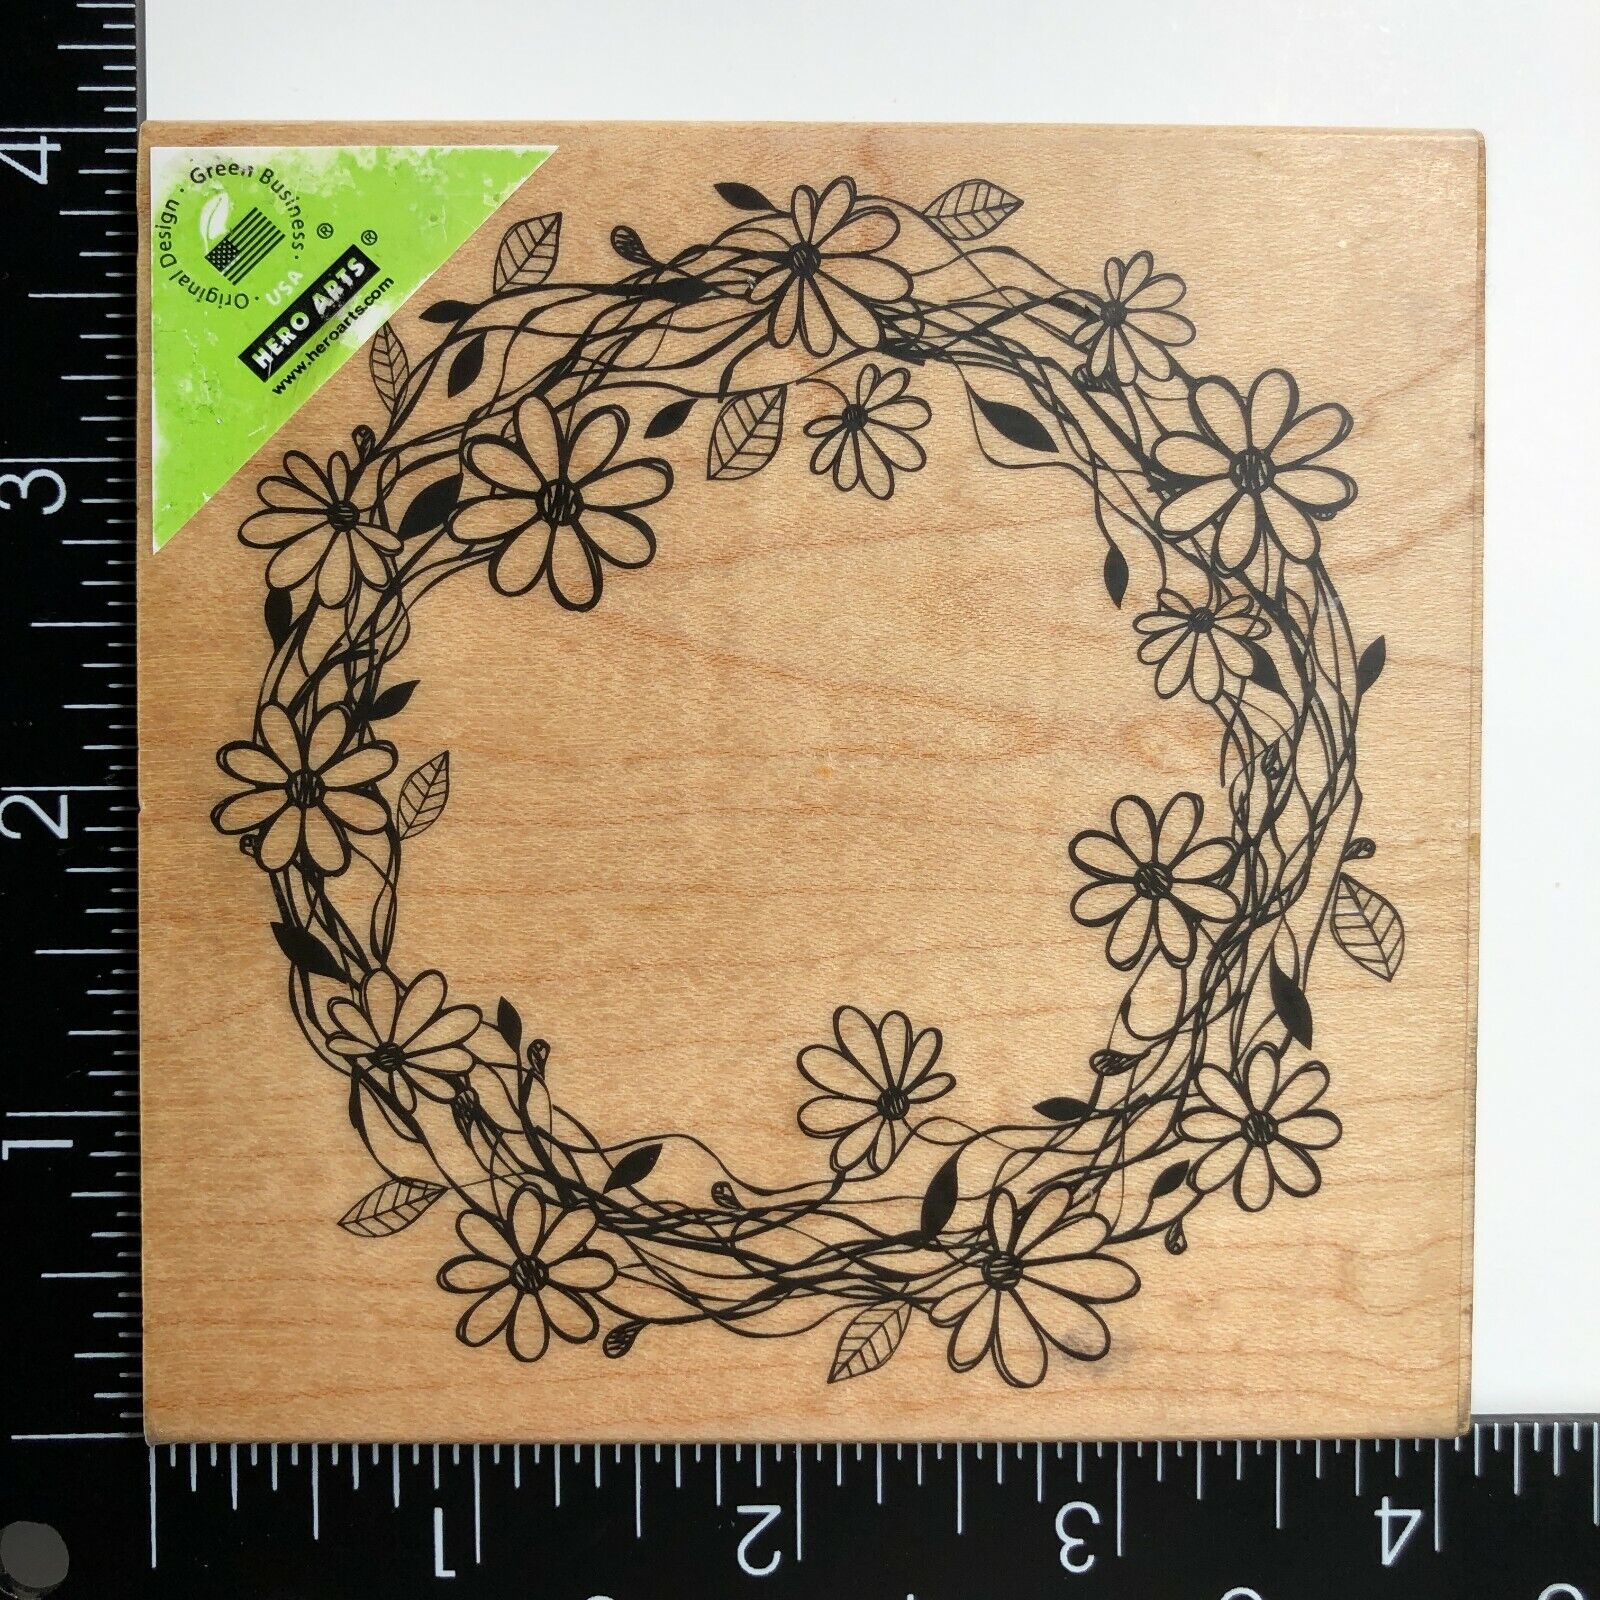 Hero Arts Flower Wreath S5491 Wood Mounted Rubber Stamp Daisy Fl